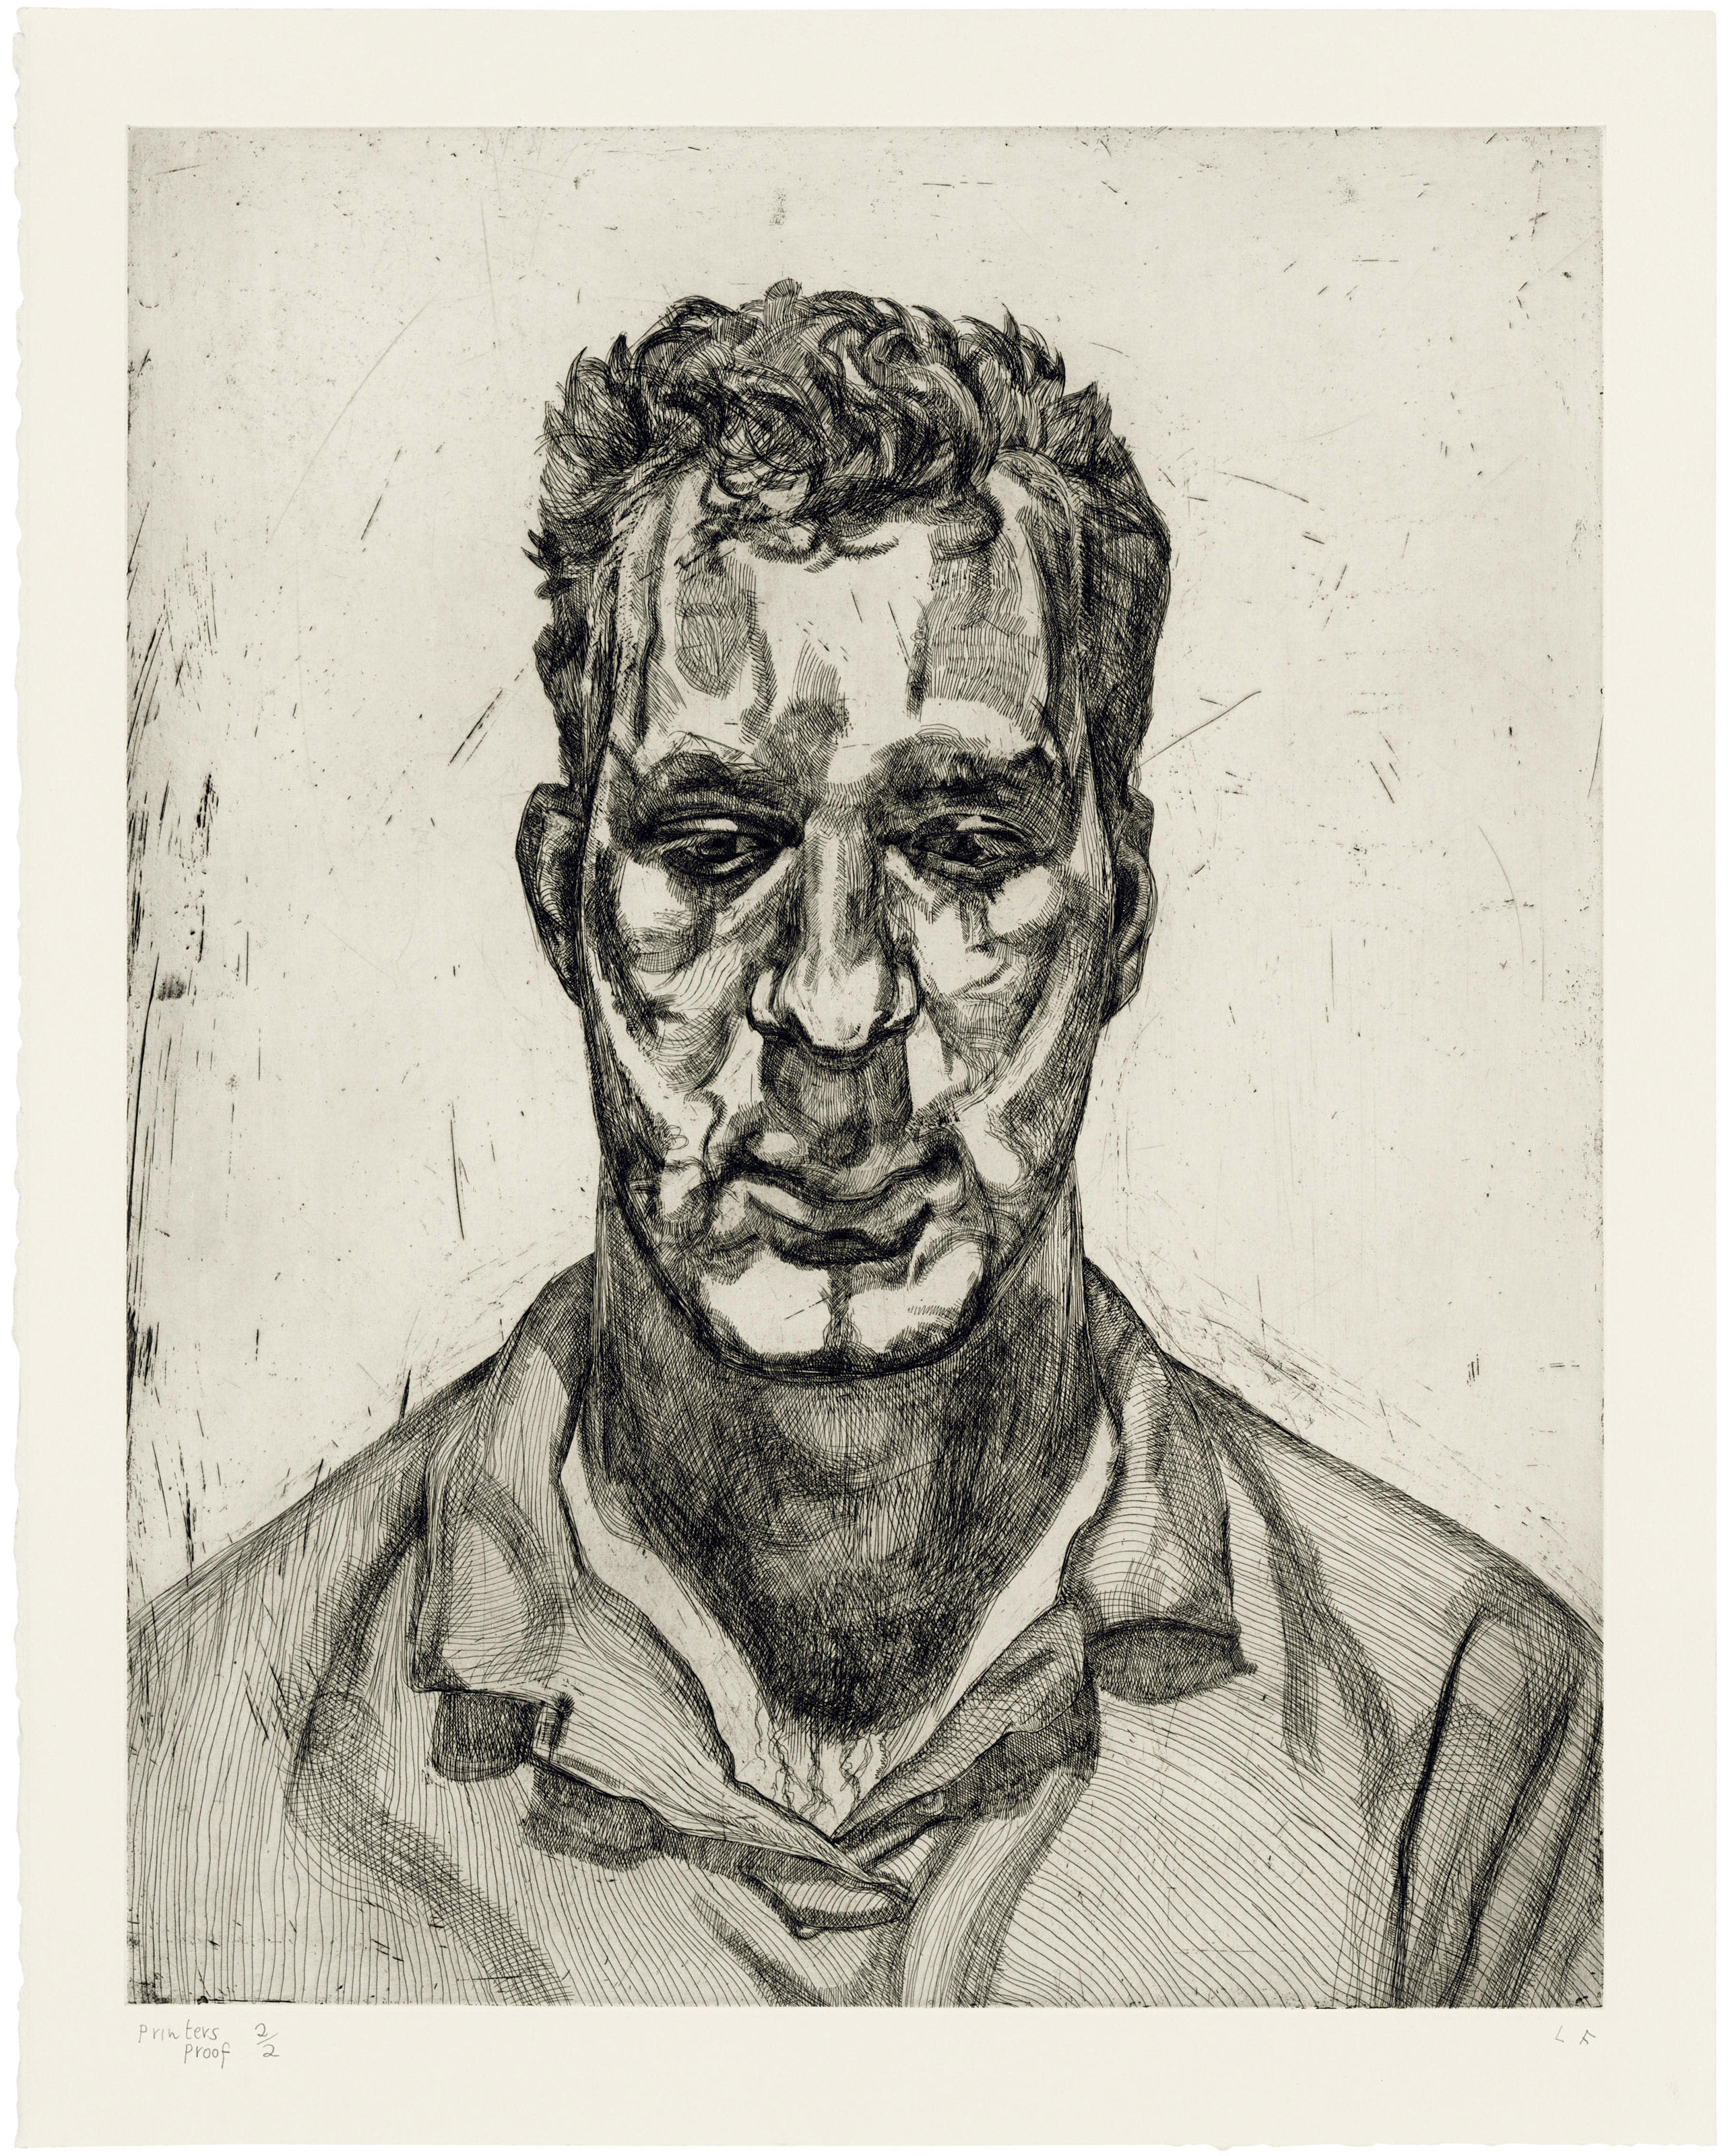 Kai by Lucian Freud. Etching, on Somerset wove paper, 1991-92, initialled in pencil, inscribed Printers Proof 2/2, before the edition of forty (there were also ten artist's proofs), published by Matthew Marks Gallery, New York. Image courtesy of Christie's